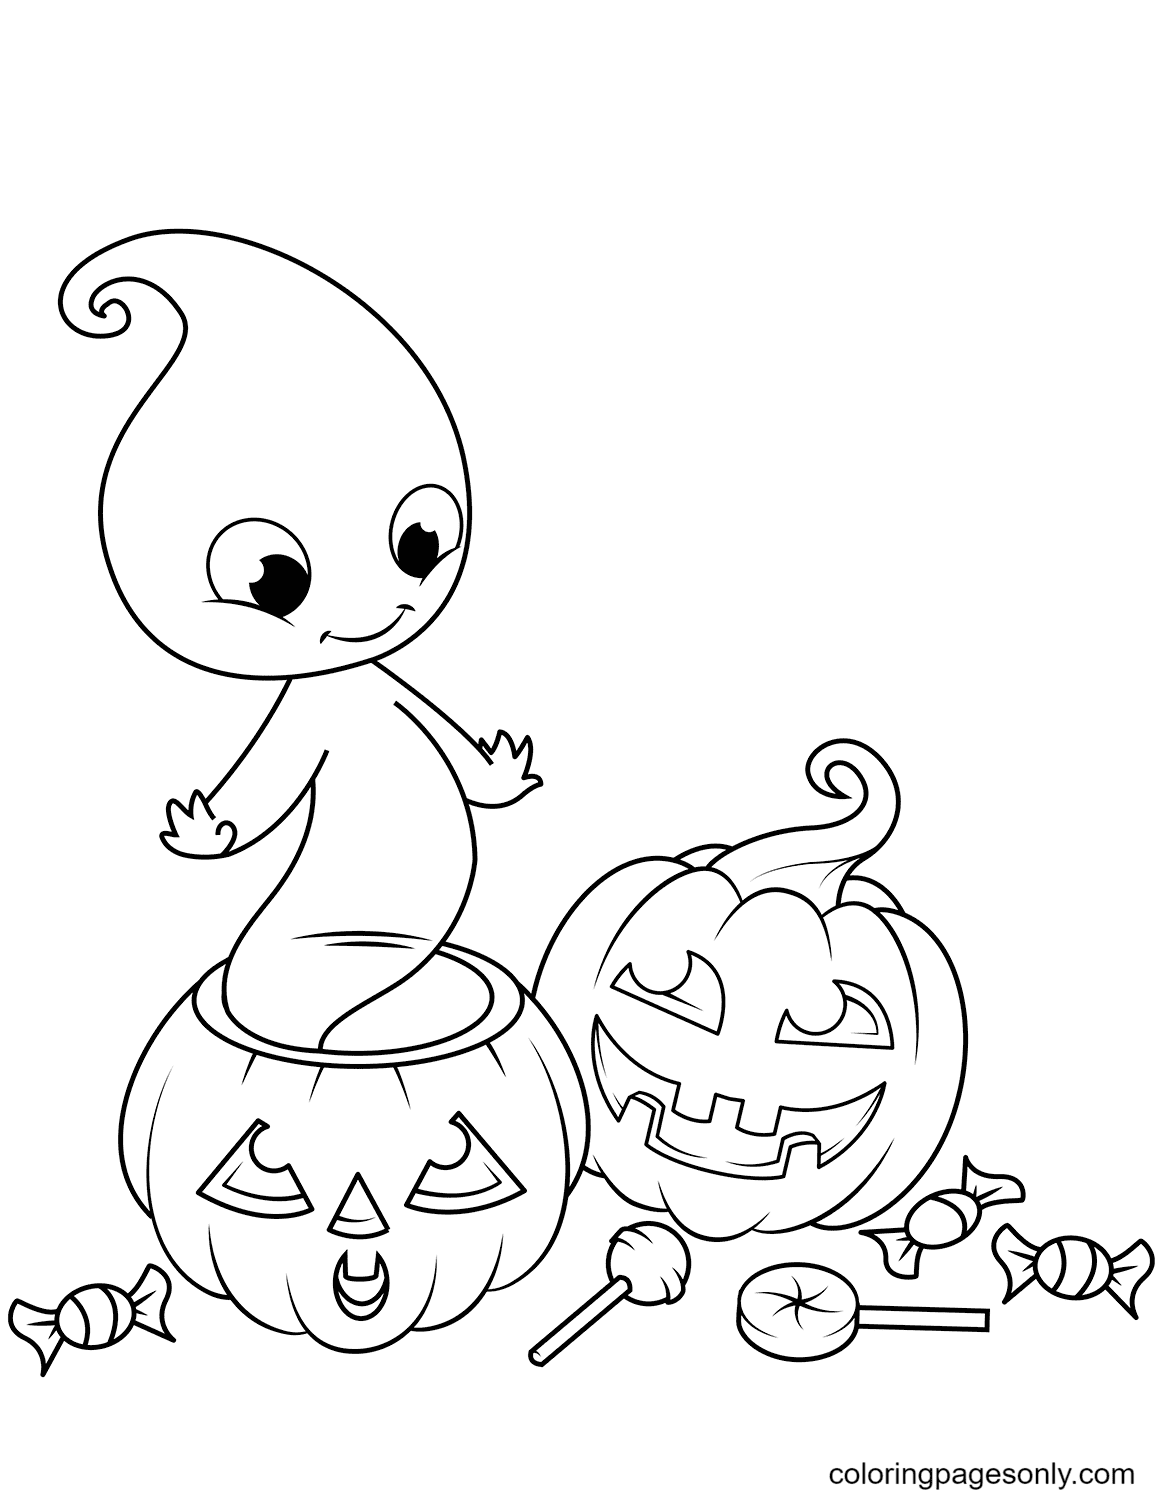 Cute Ghost from Jack O’Lantern Coloring Page